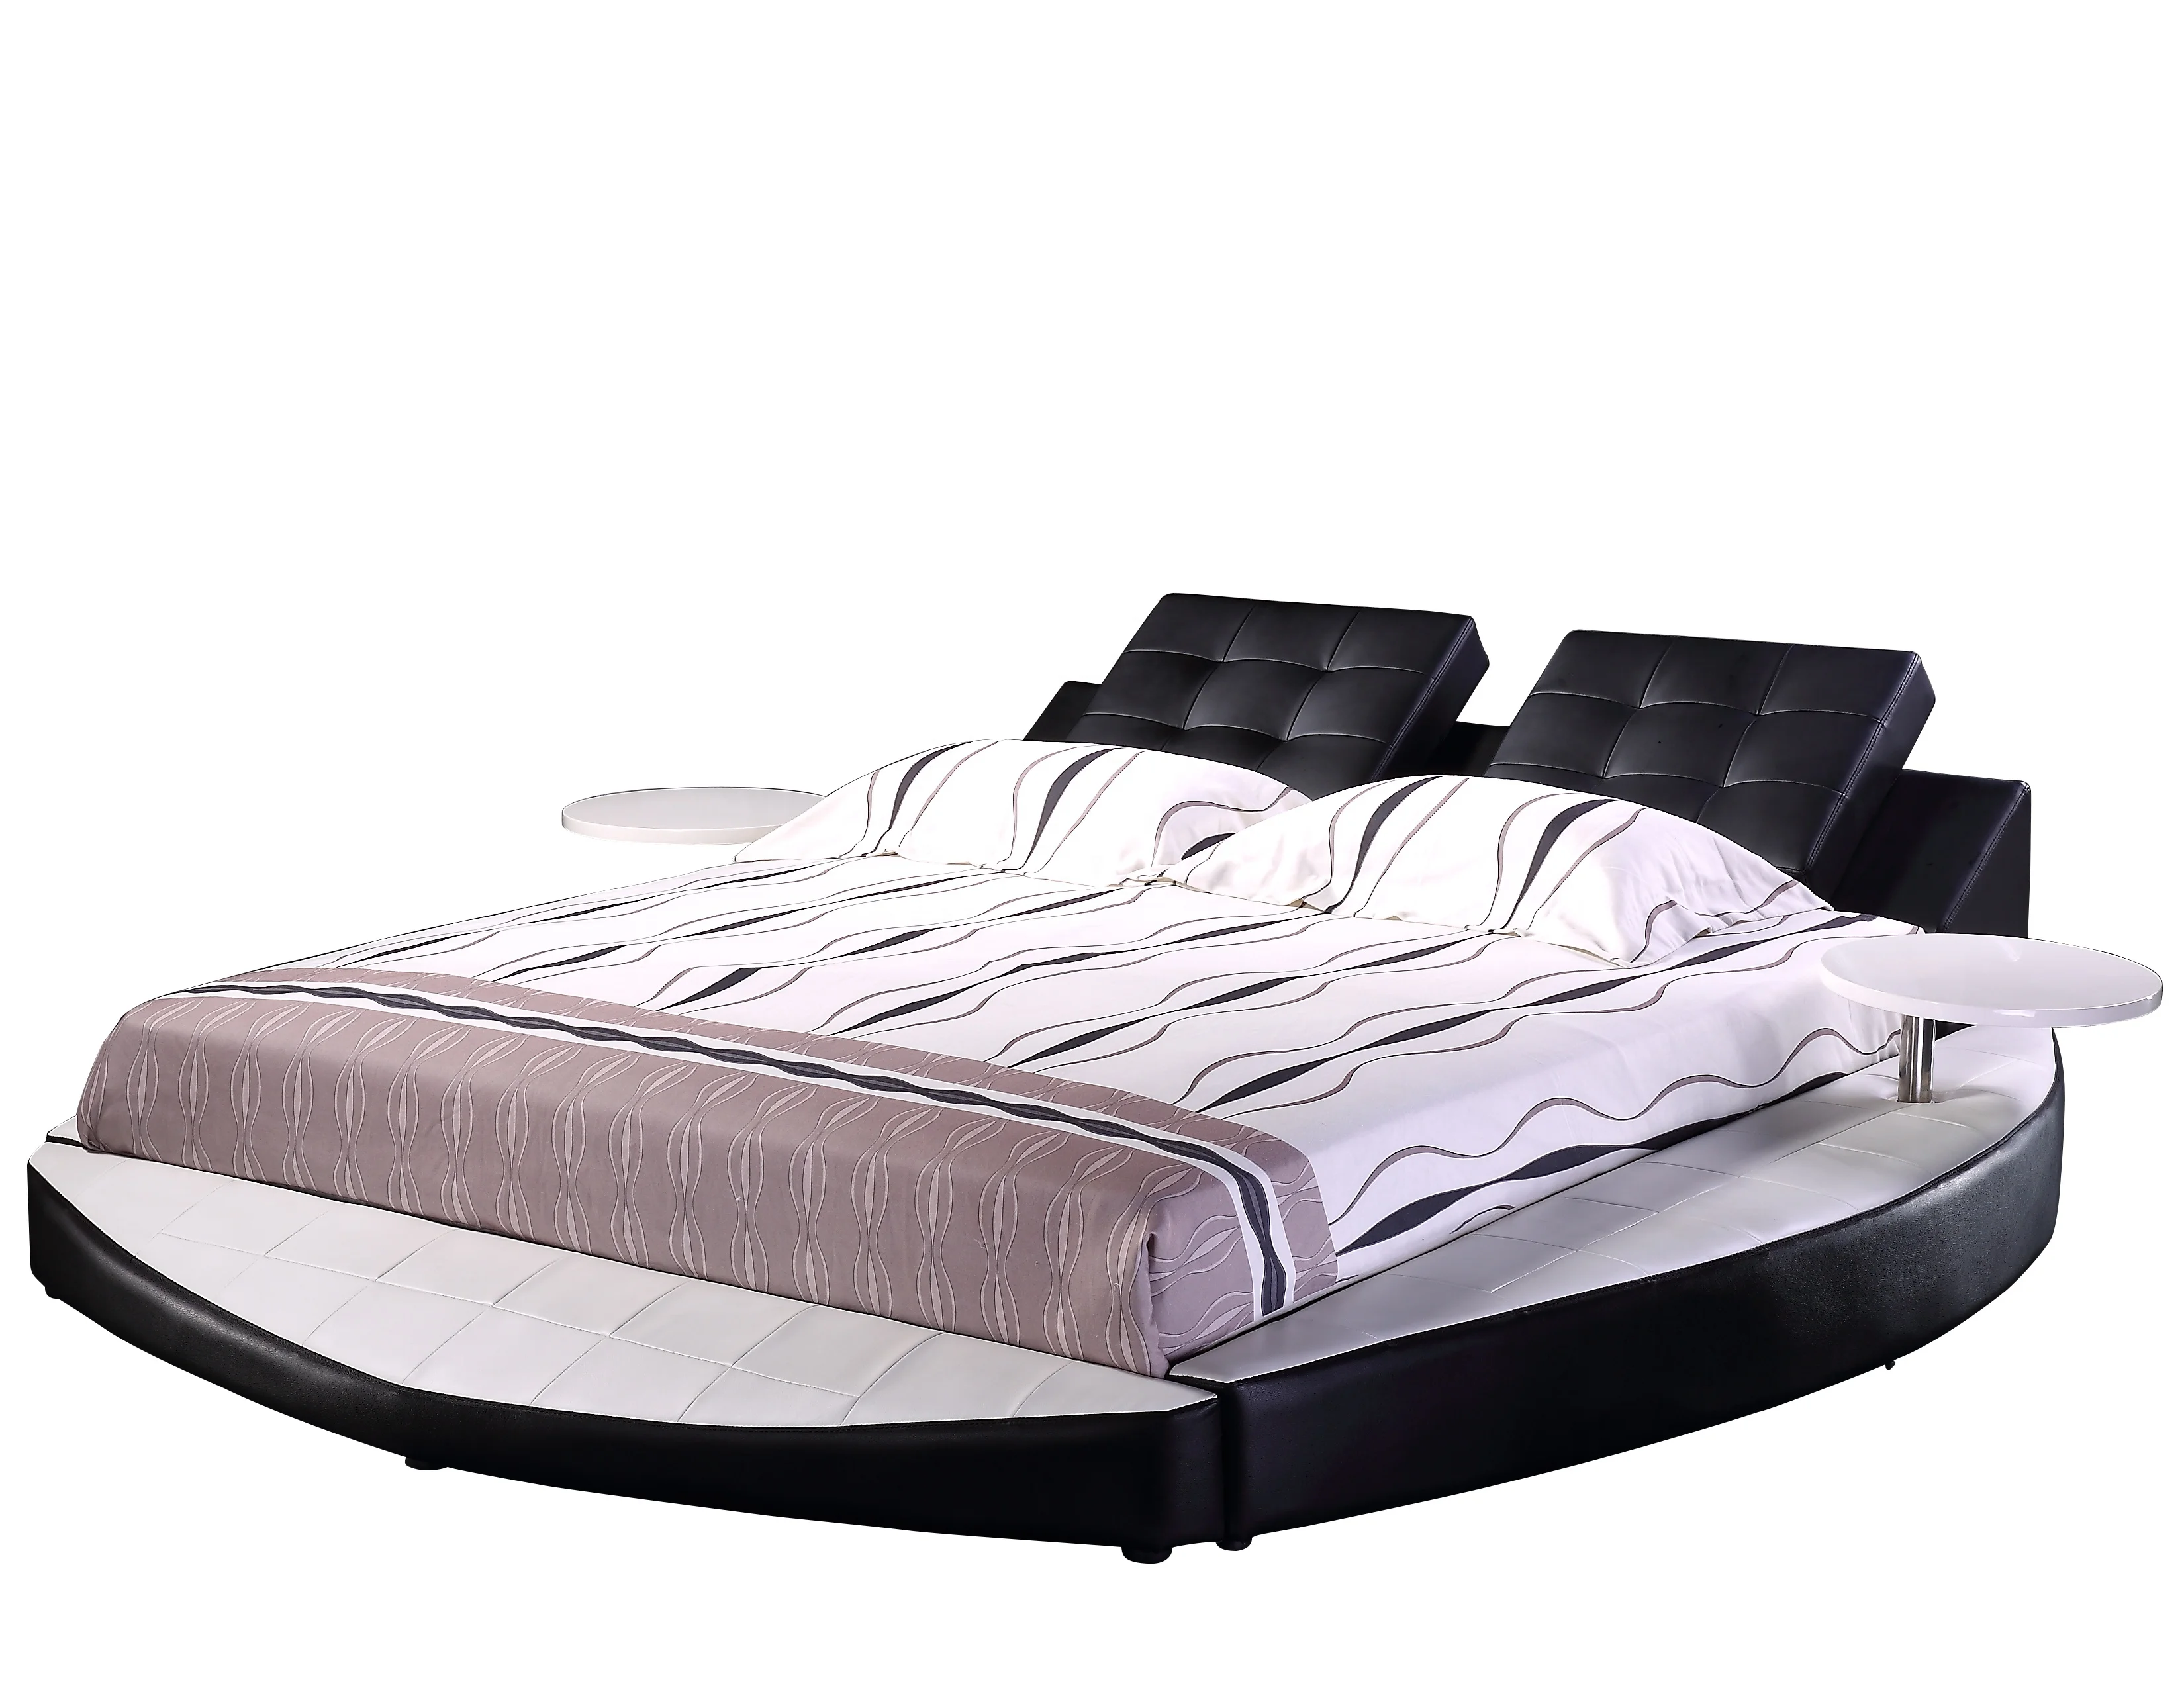 Round Bed Price King Size Round Bed On Sale